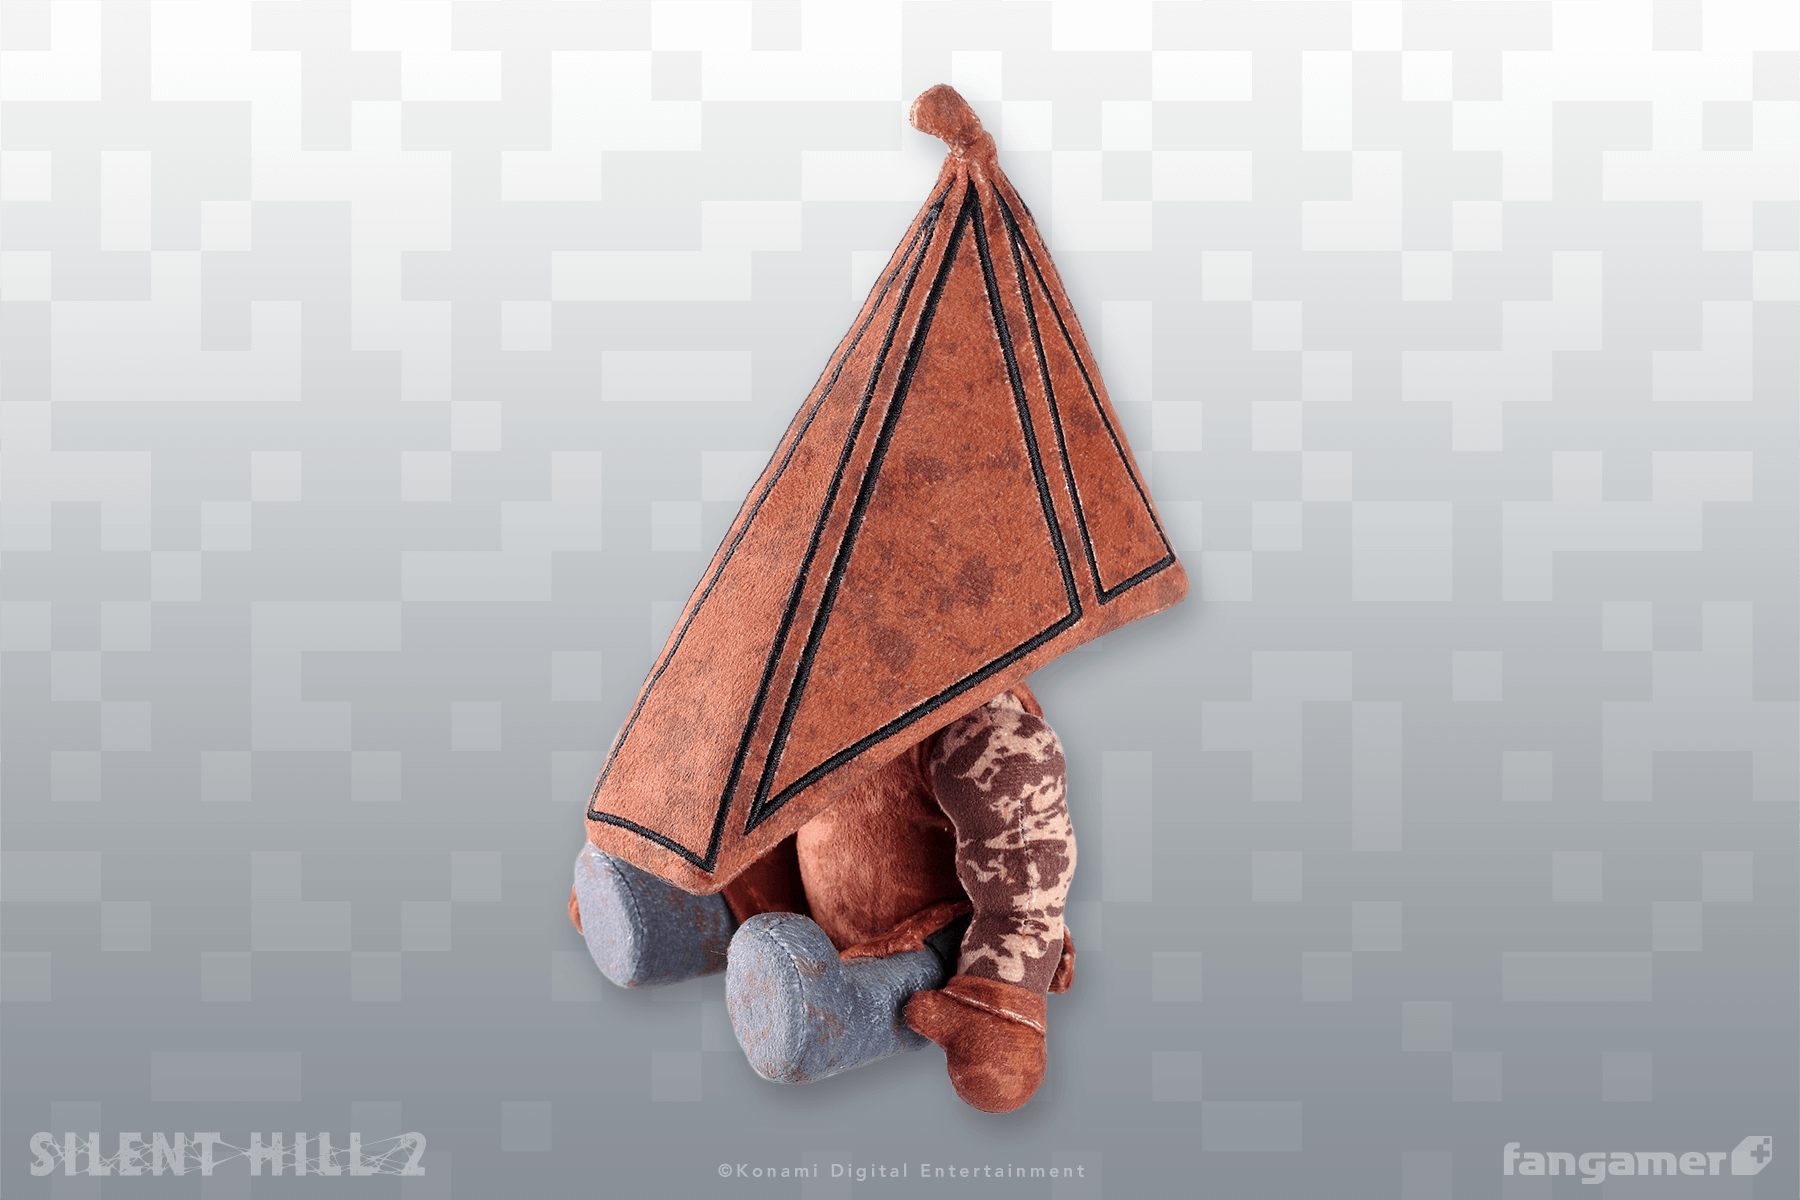 Let's Craft: Pyramid Head's Great Knife - All Cardboard Edition! 